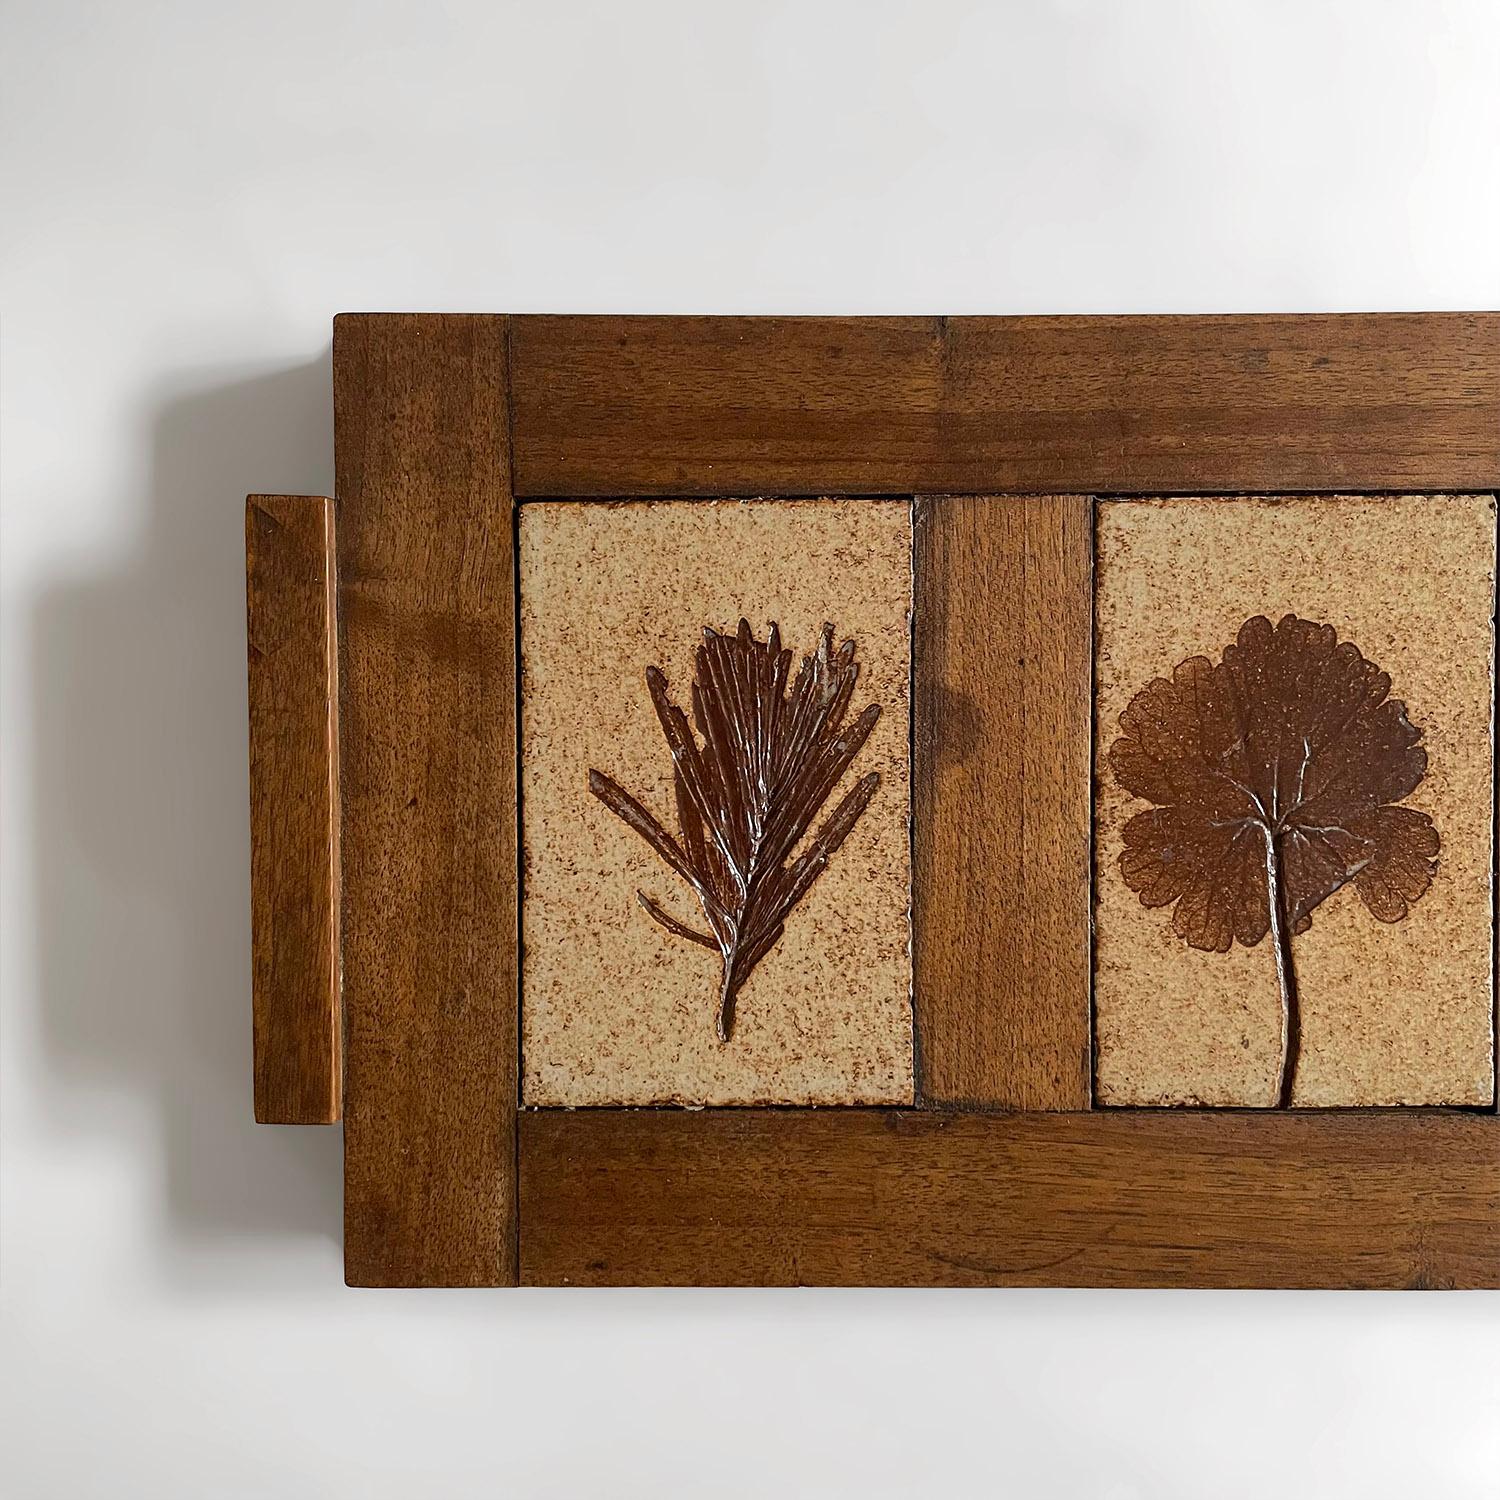 French oak & stoneware tray
France, mid century
Solid oak tray with wonderful wood grain and joinery
Beautifully worn in from years of use, the wood has light surface markings and has been newly reconditioned
Adorned with handmade stoneware tiles